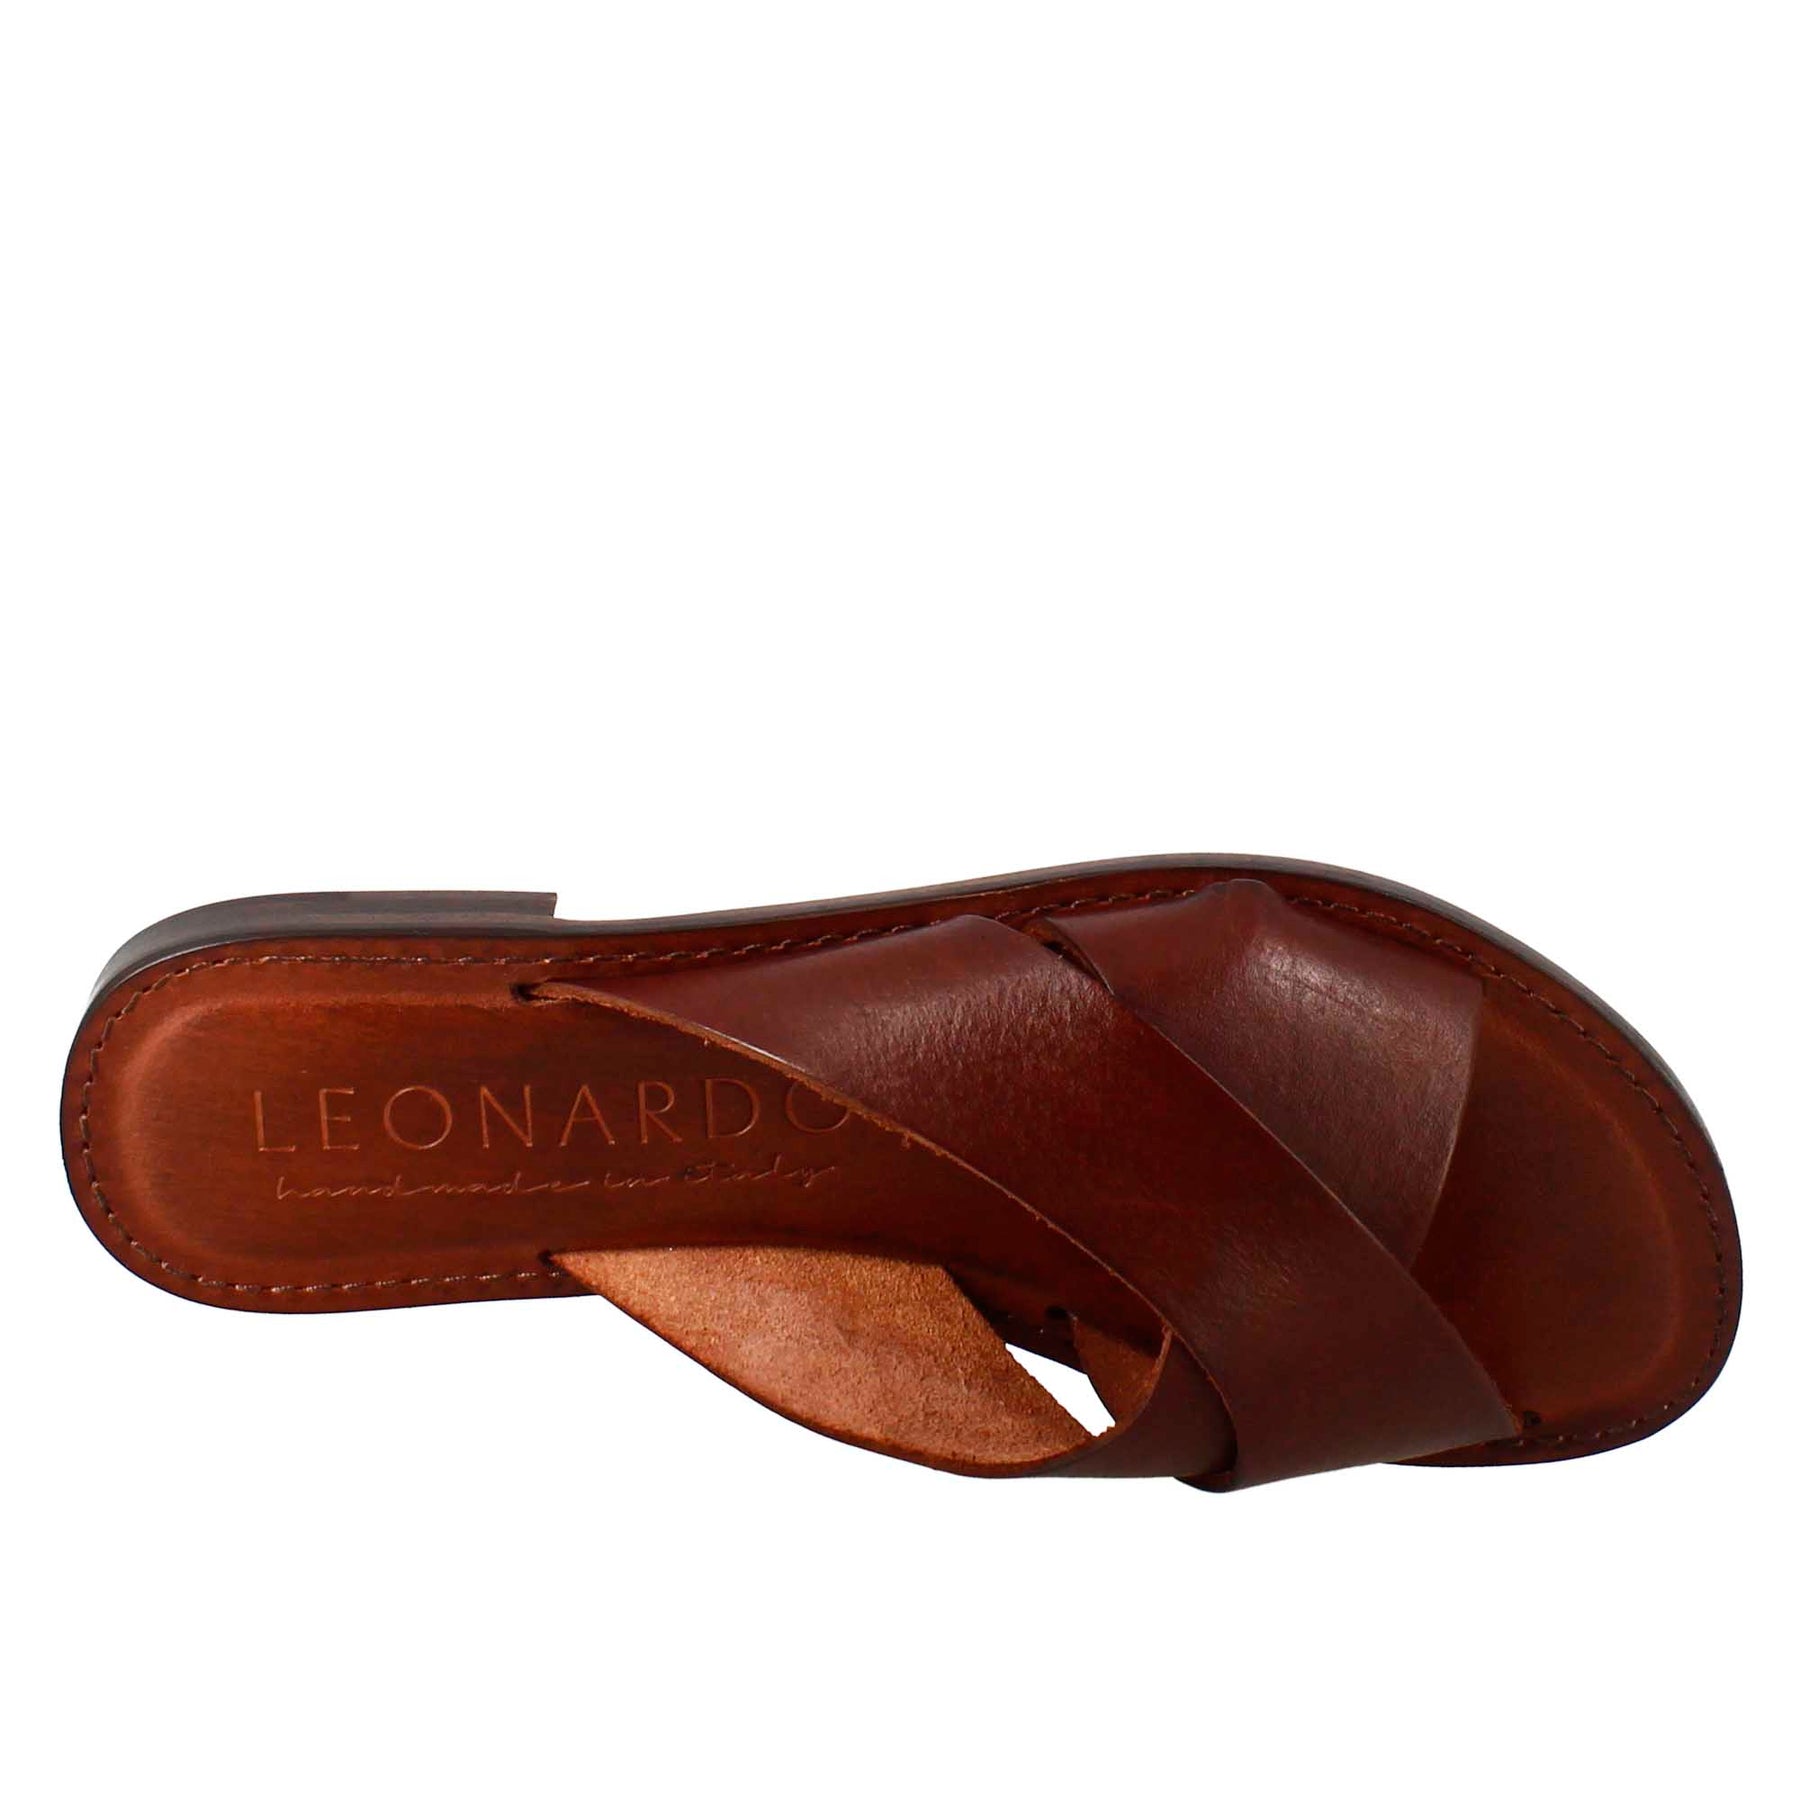 Incanto women's sandals in ancient Roman style in brown leather 